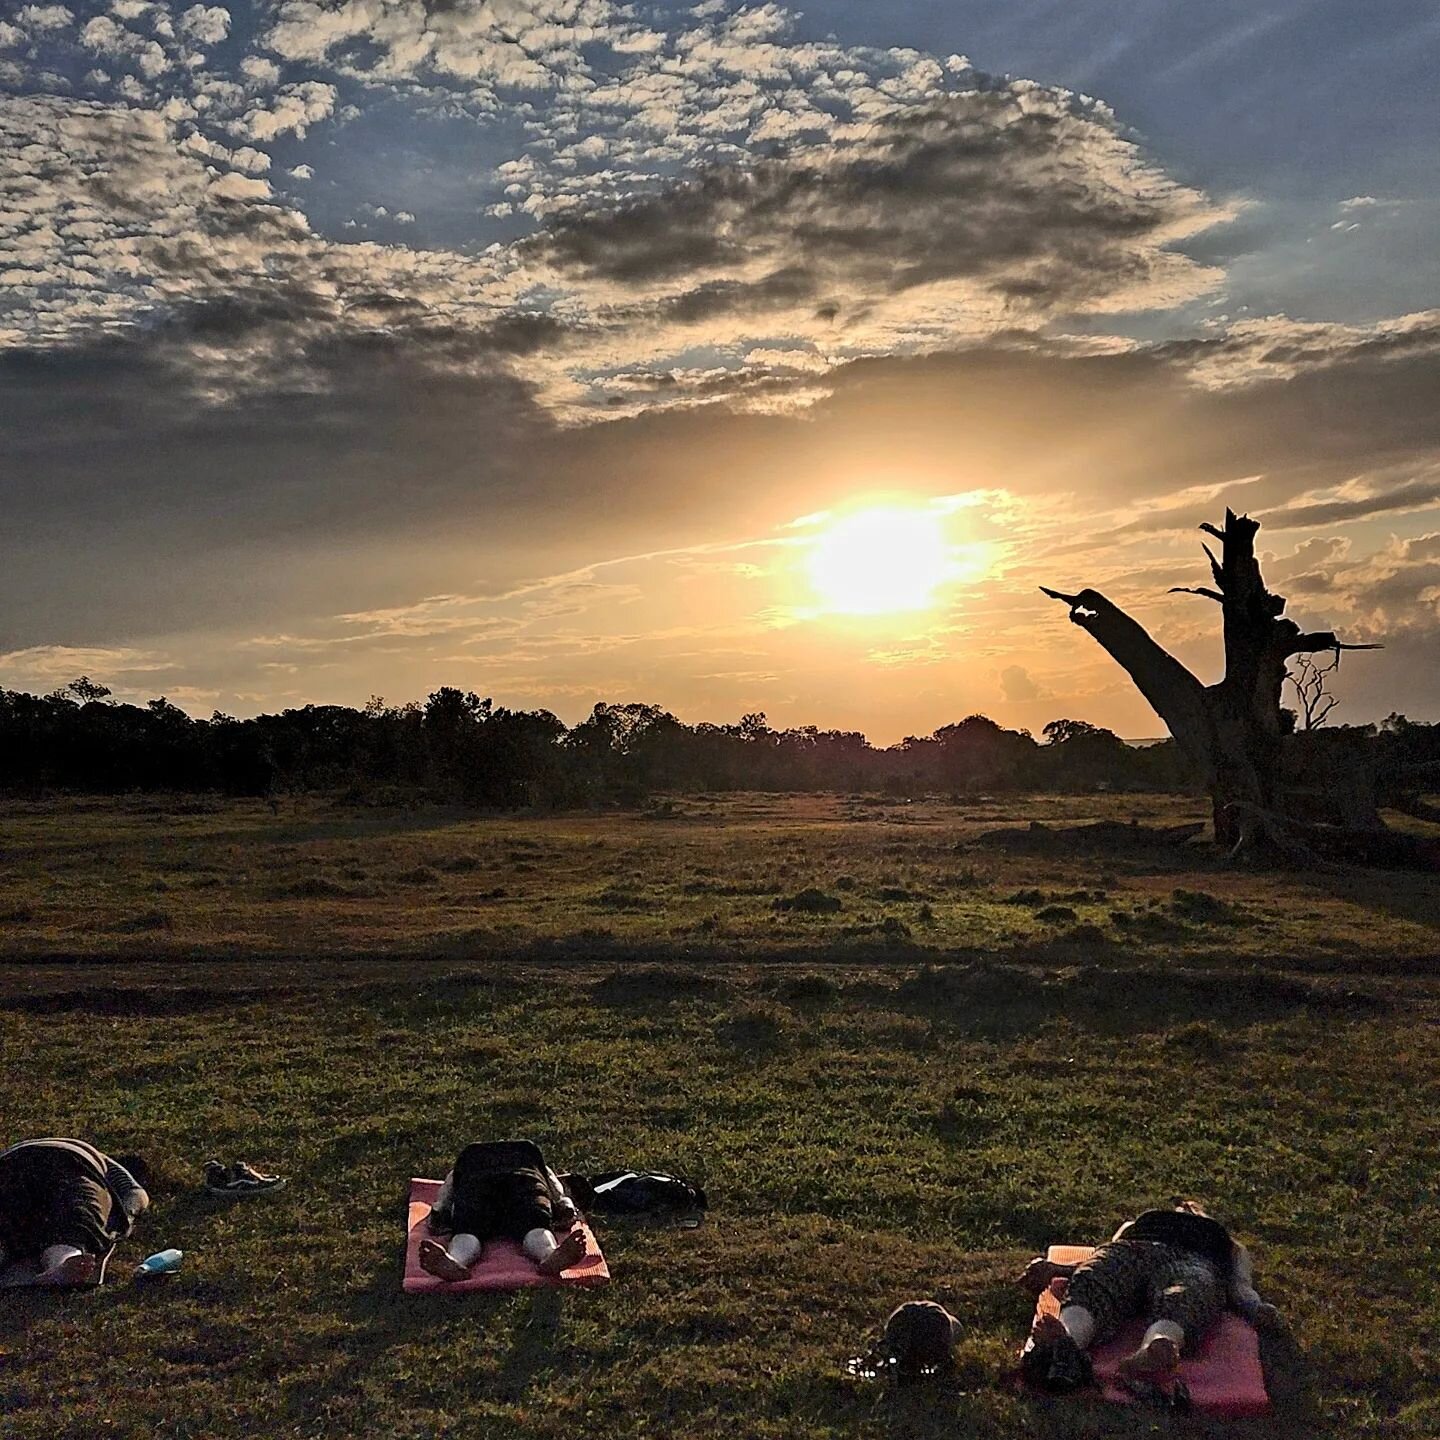 *Disclaimer* I normally do not post pictures of people in savasana... However, being able to practice in the bush of Kenya with @yoga_for_the_wild really is the most amazing and transformative experience! Feeling complete vulnerability to the natural